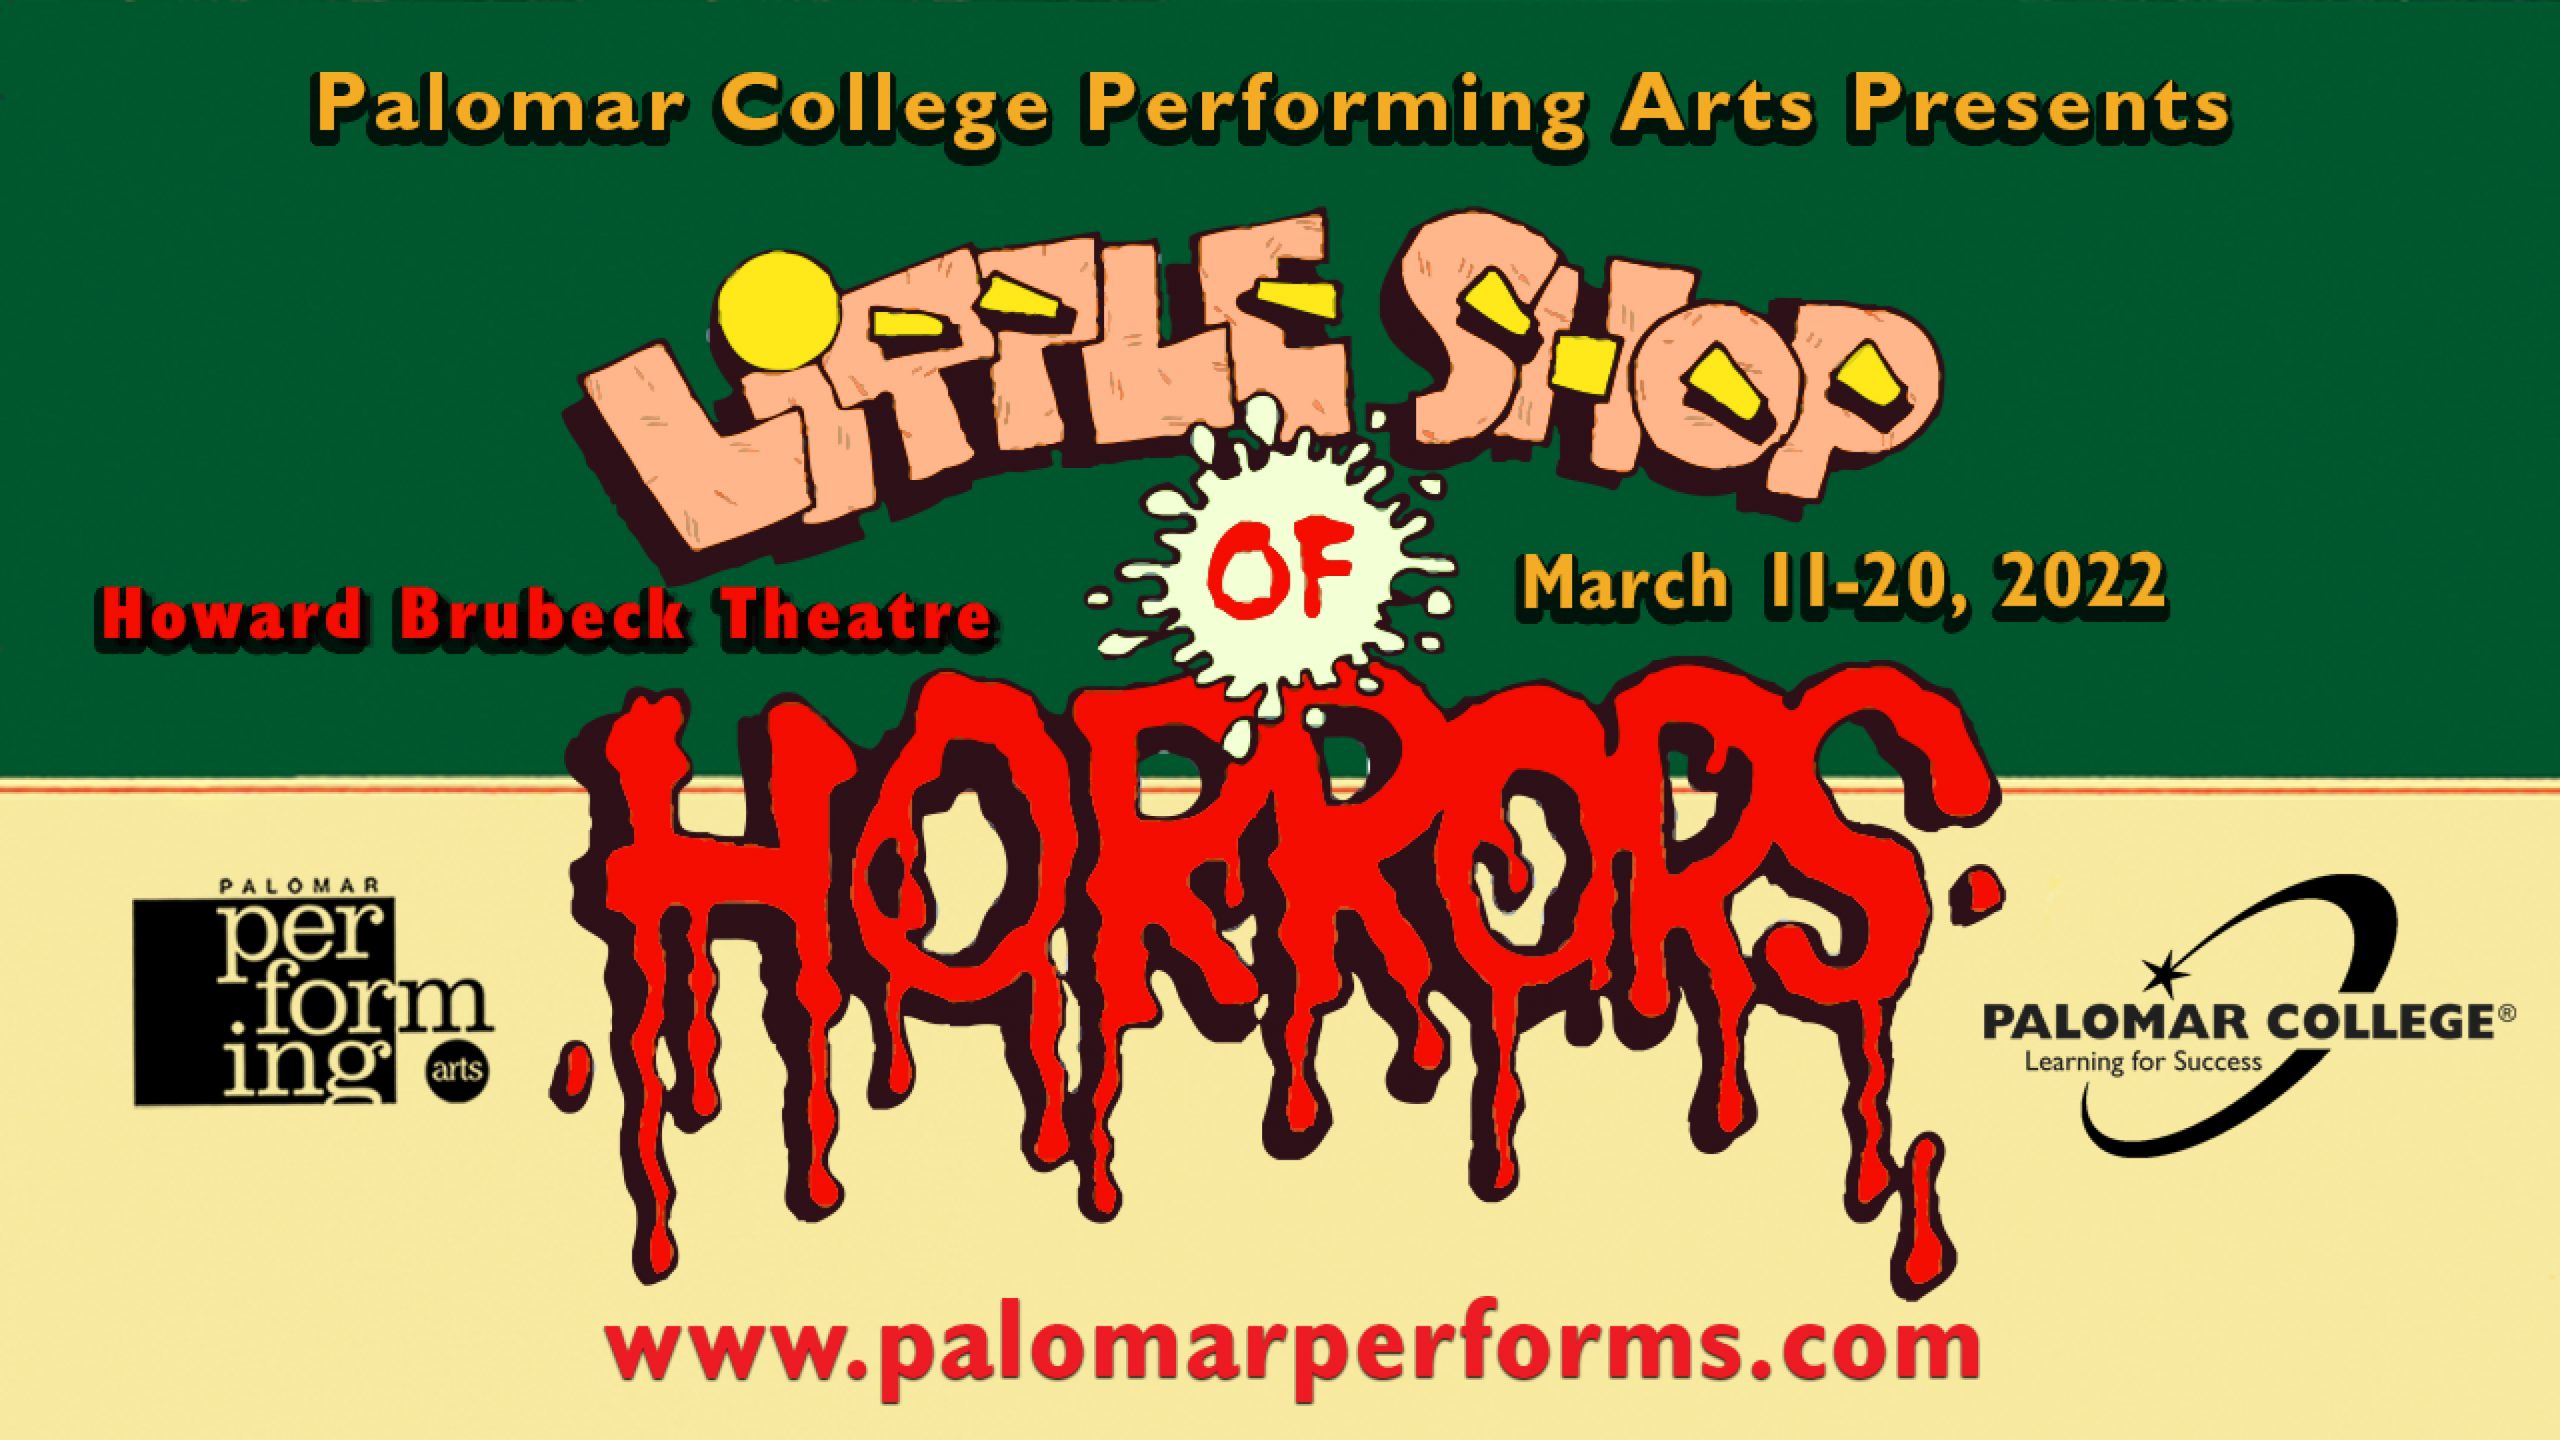 Little Shop of Horrors Poster